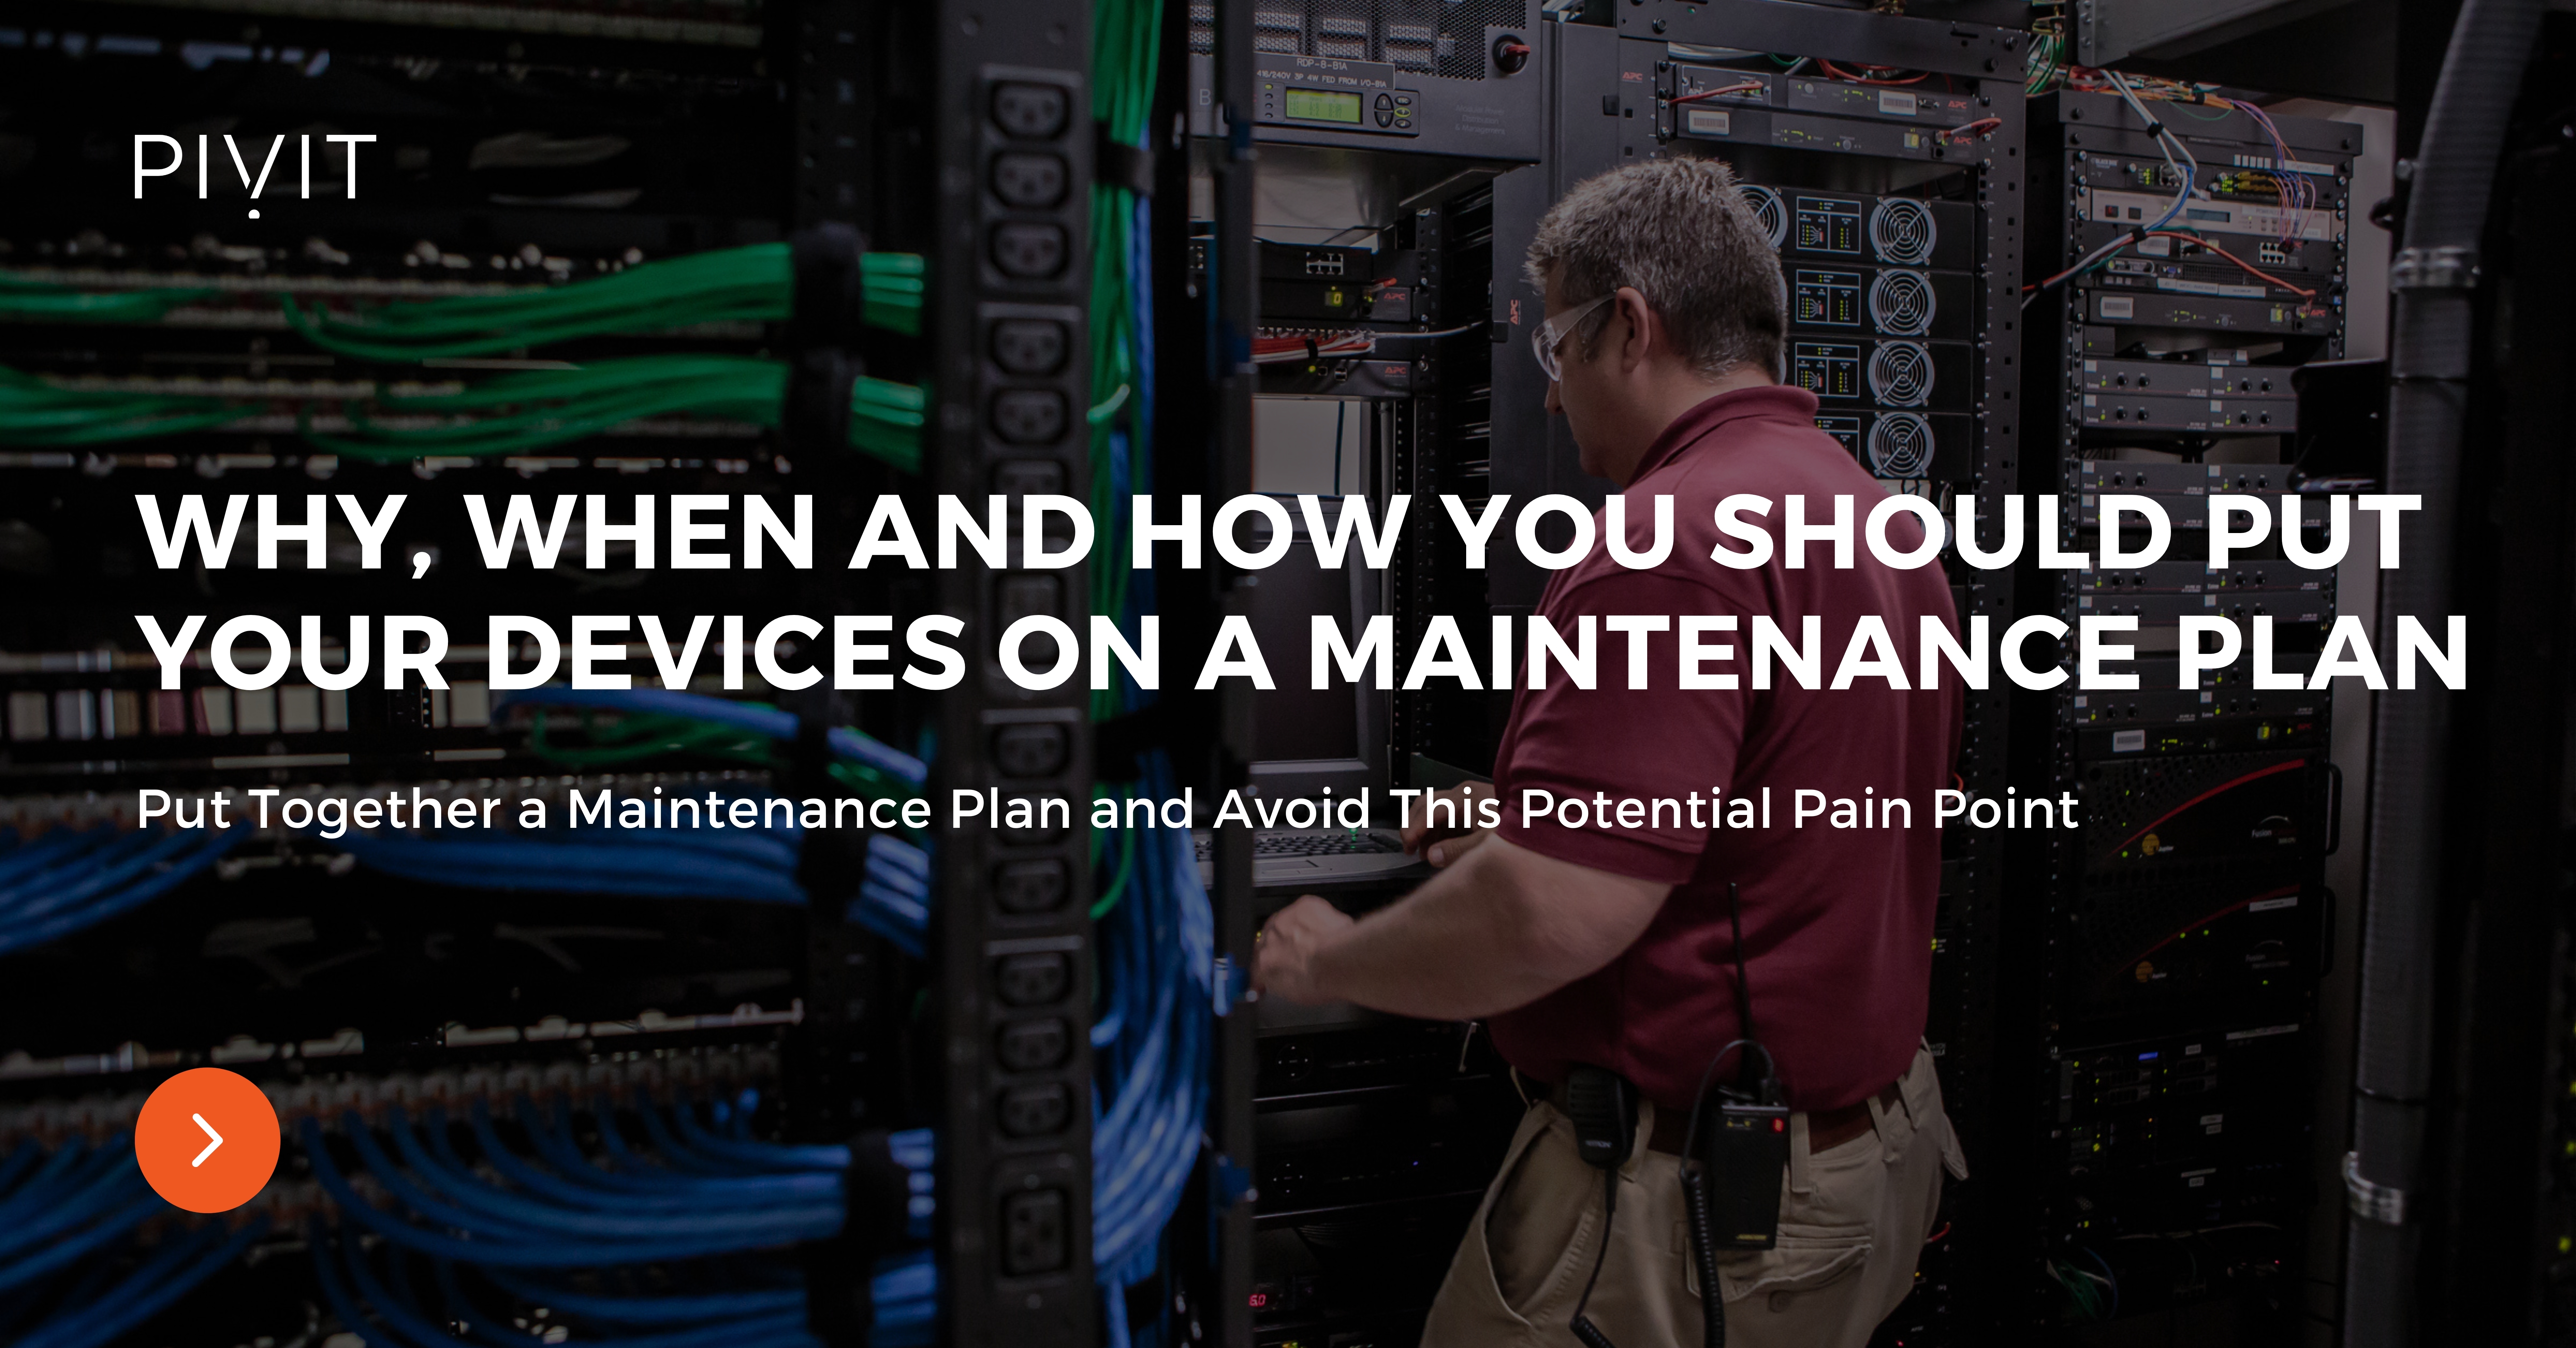 Why, When and How You Should Put Your Devices on a Maintenance Plan - Put Together a Maintenance Plan and Avoid This Potential Pain Point